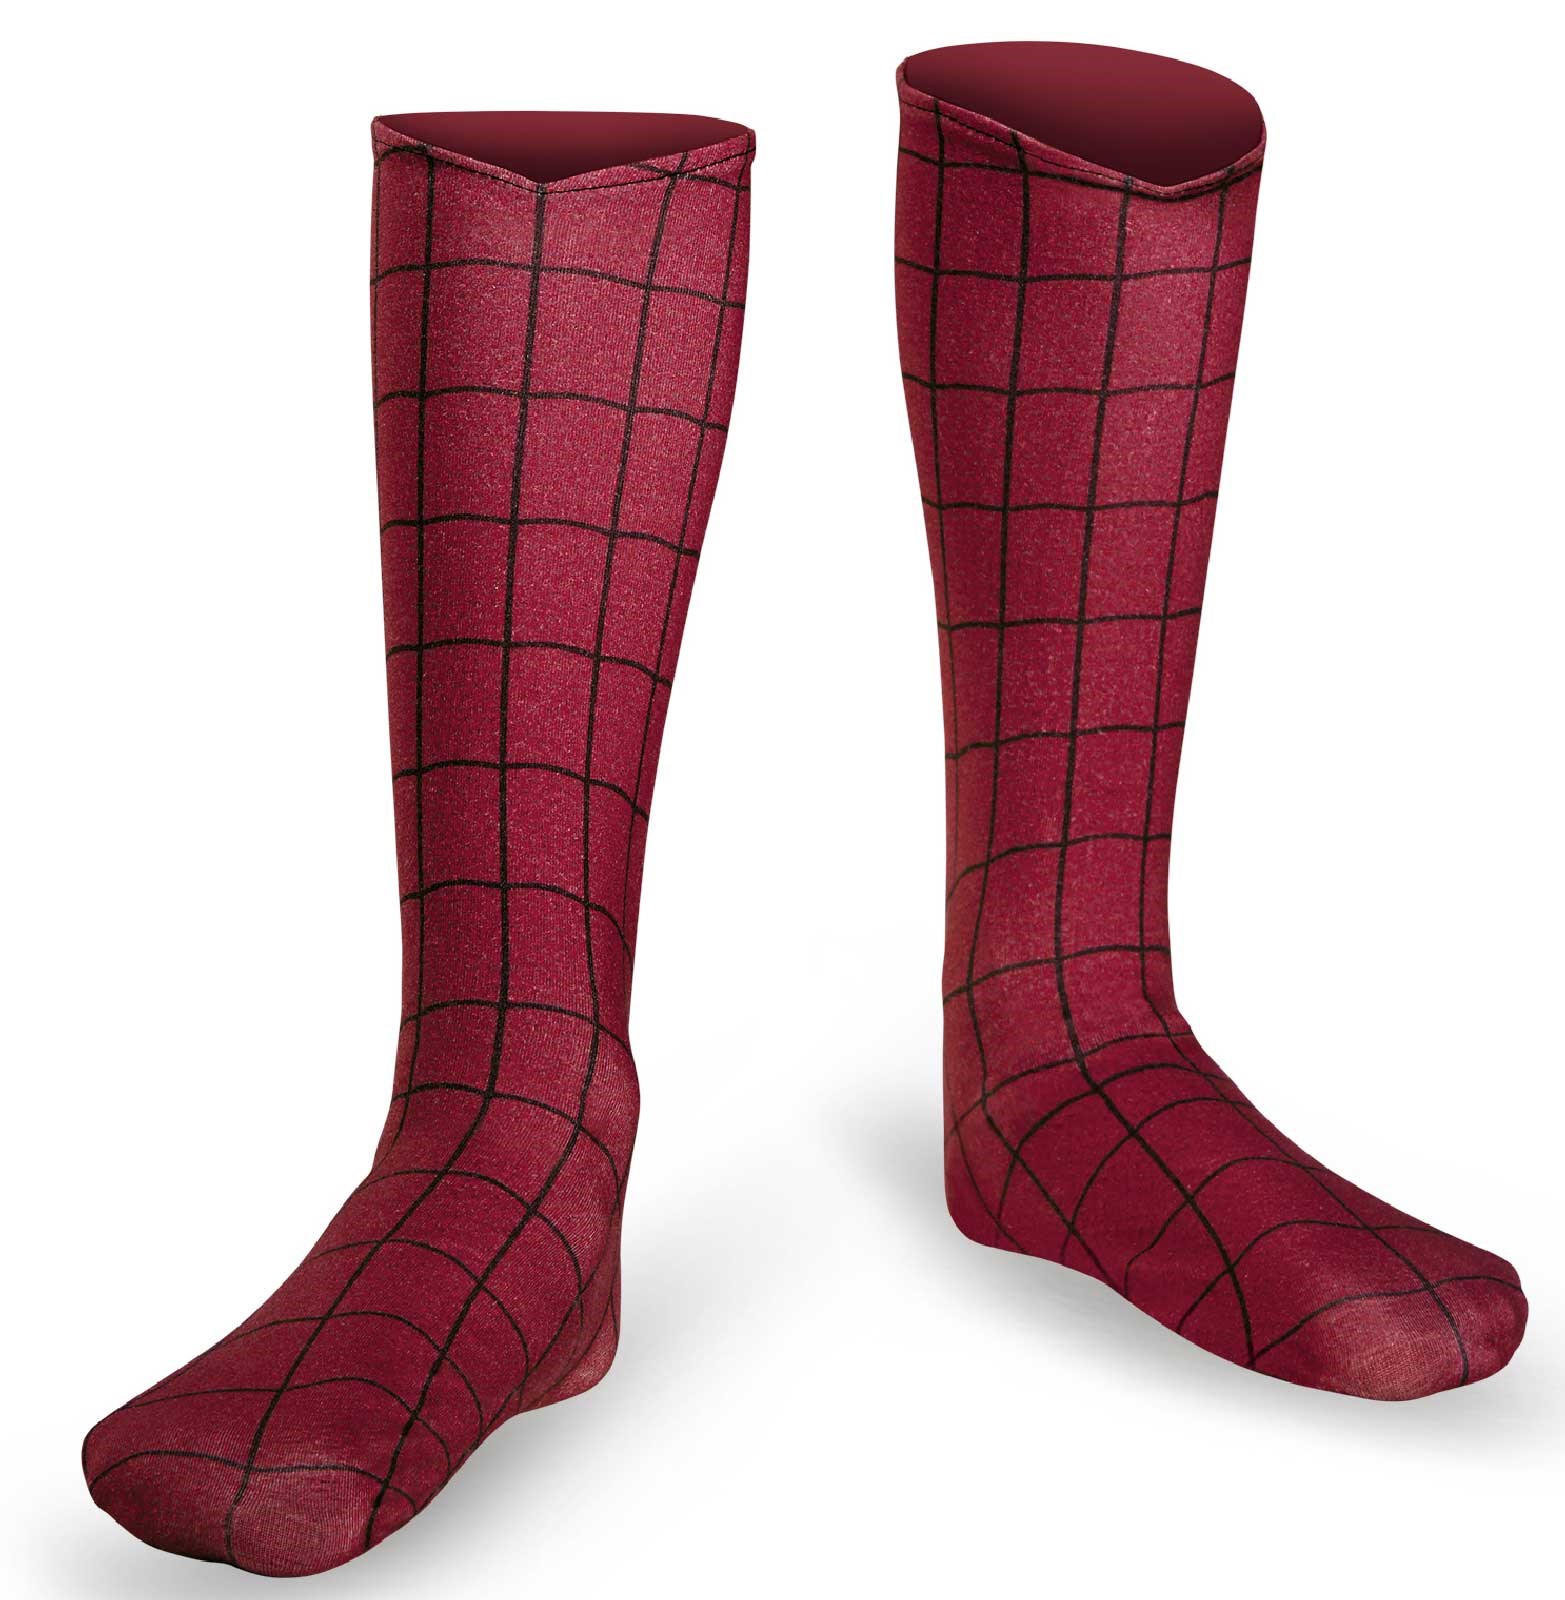 Spider-Man Movie 2 – Adult Boot Covers